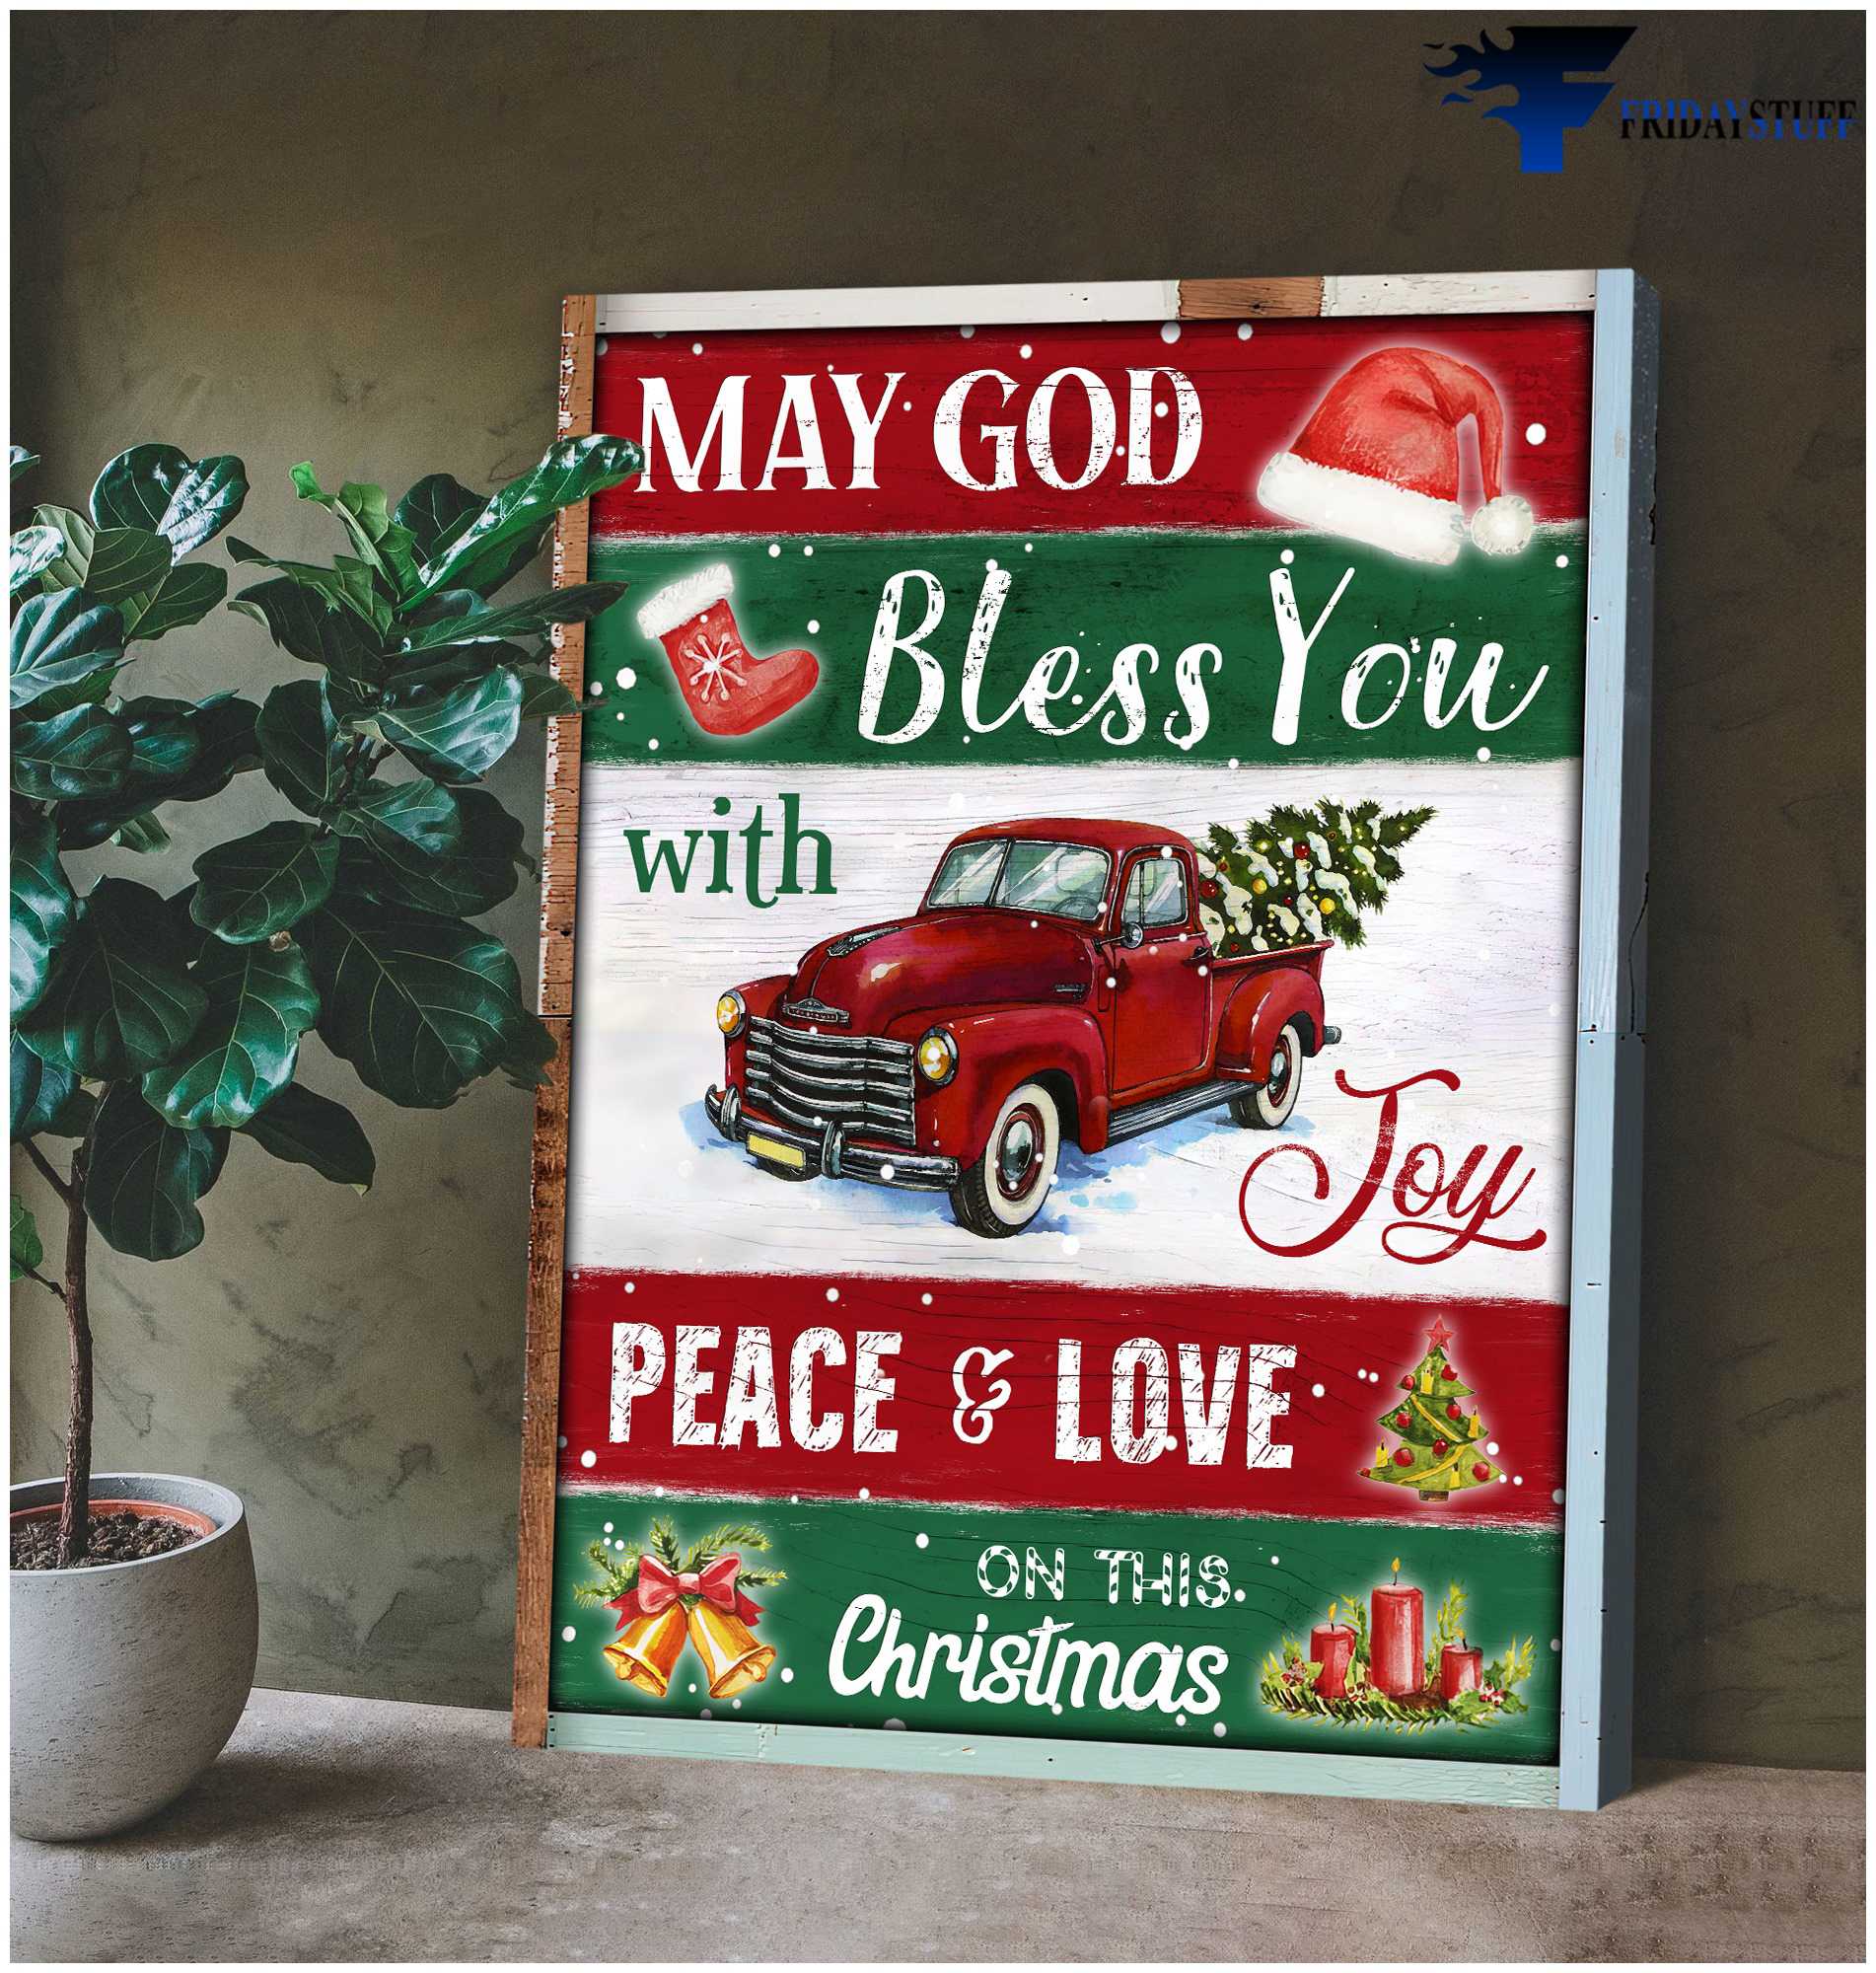 Christmas Truck, May God Bless You, With Joy, Peace And Love, On This Christmas